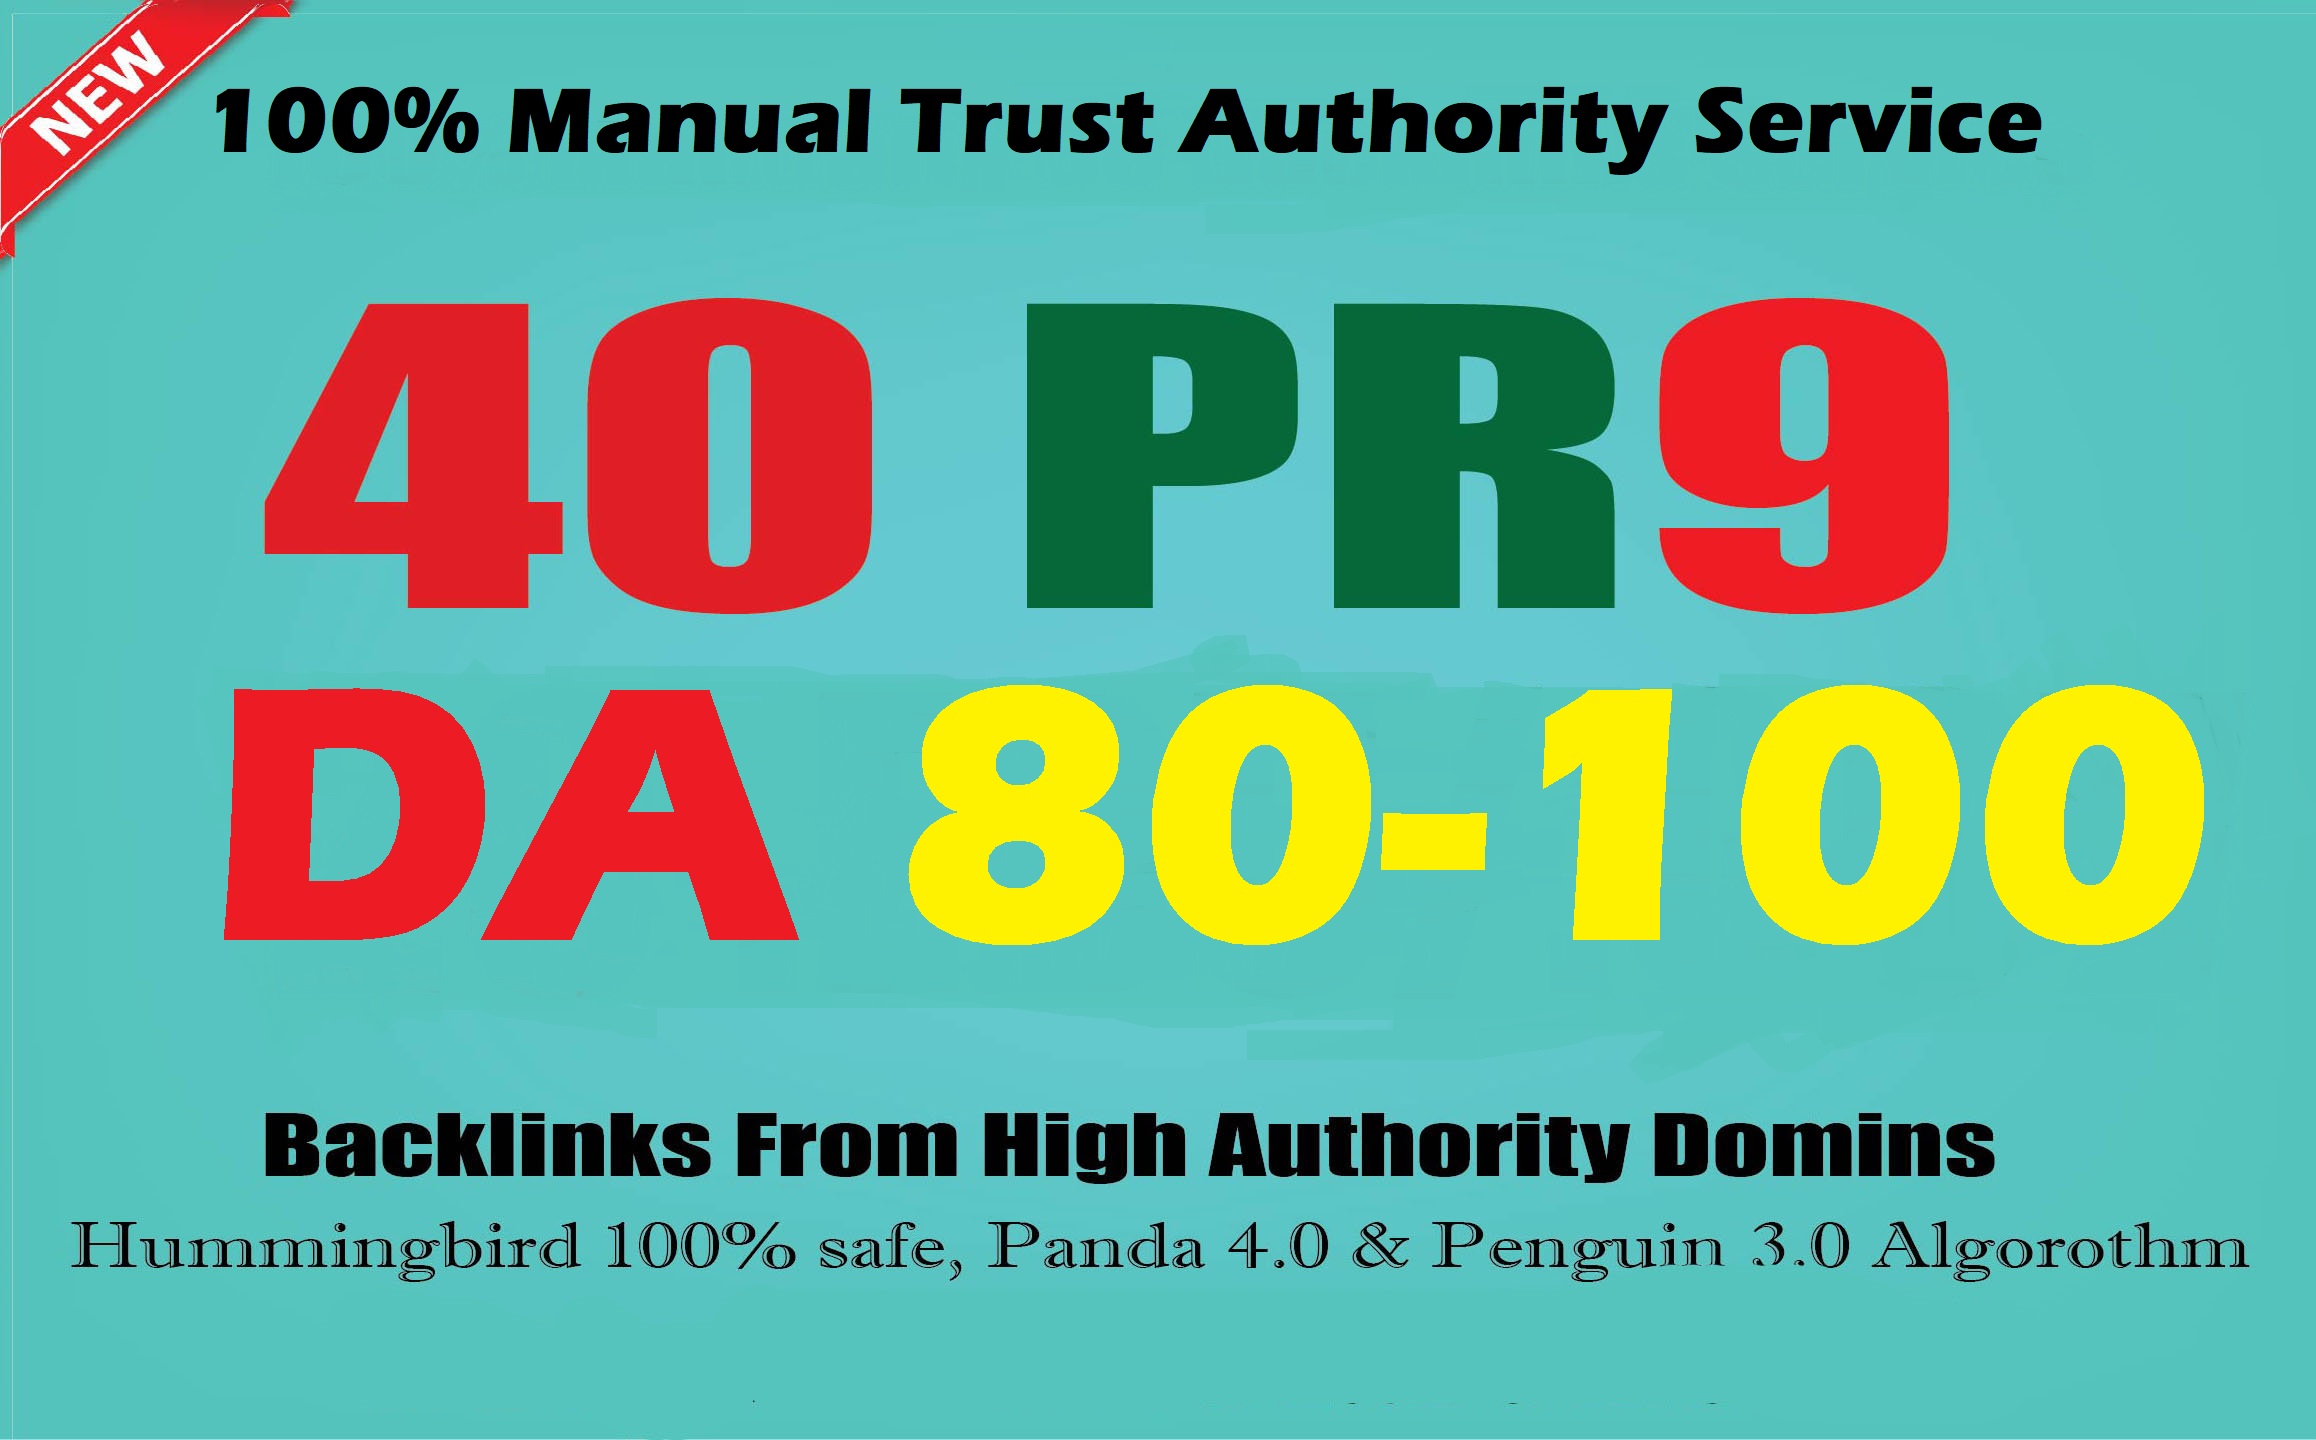 Manual 45 Backlinks from High DA 80+ Domains-Skyrocket your Google RANKINGS NOW